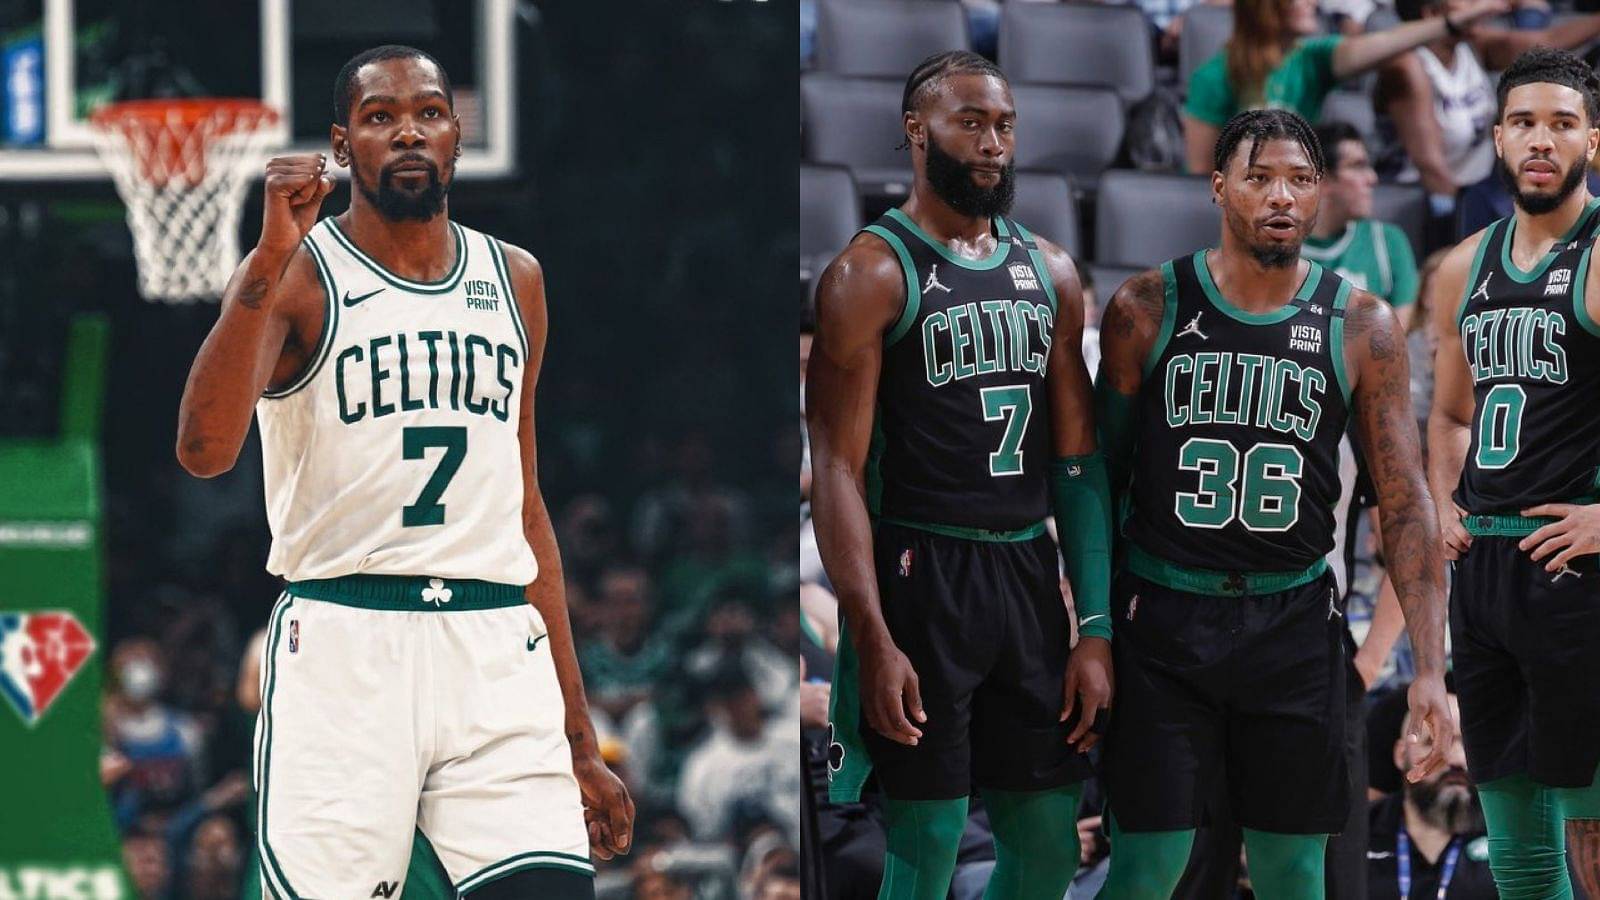 “Ayo Celtics! Do NOT trade for Kevin Durant if it means losing Jaylen Brown”: Fans would rather have Jay’s running the show in Boston than risking it all for Nets’ $194 million star